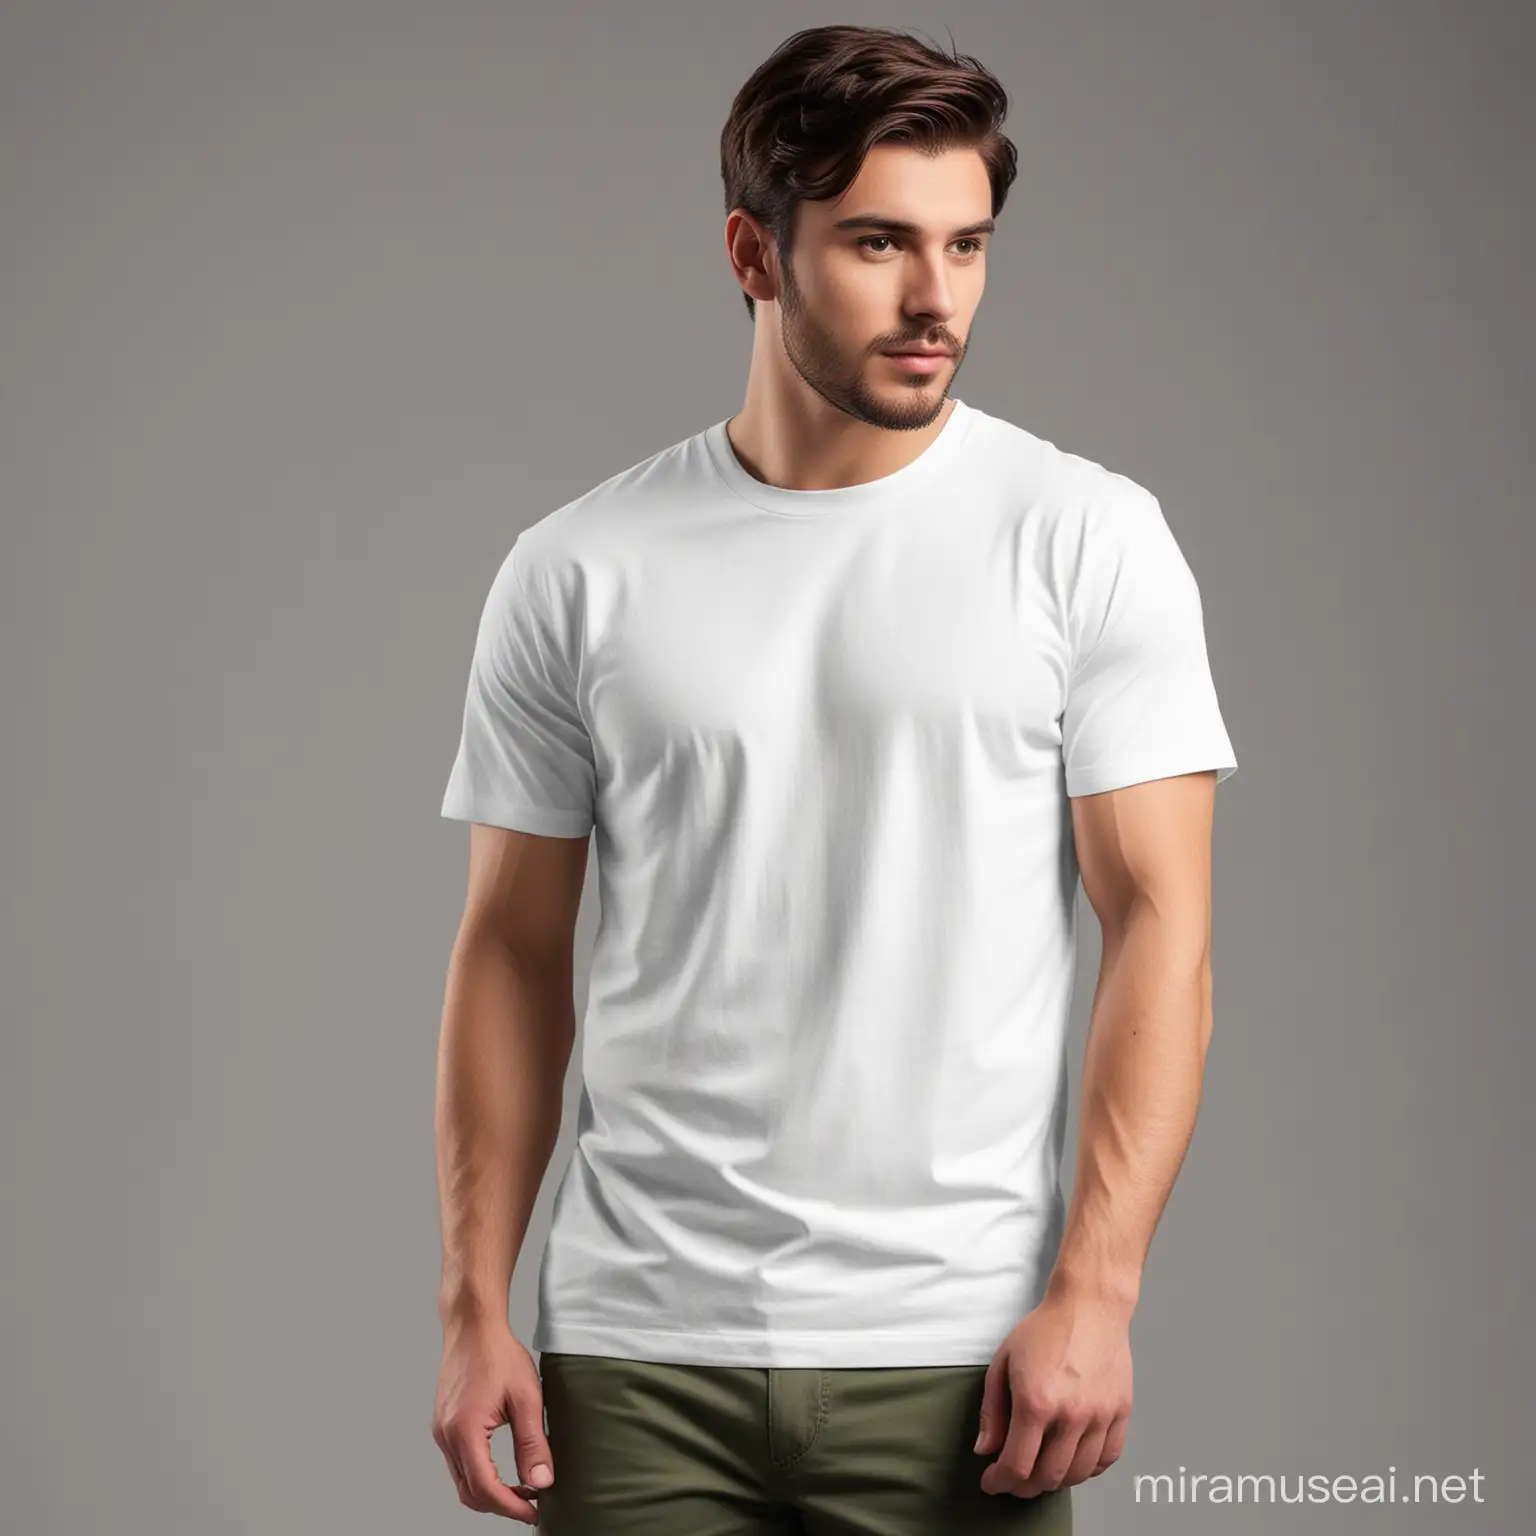 Create a captivating mockup featuring the Gilban 64000 white t-shirt, showcasing its versatility and comfort. Consider incorporating dynamic visuals that highlight its ideal fit for everyday wear or various occasions. Additionally, explore different background settings or complementary accessories to enhance the overall presentation and appeal of the t-shirt."